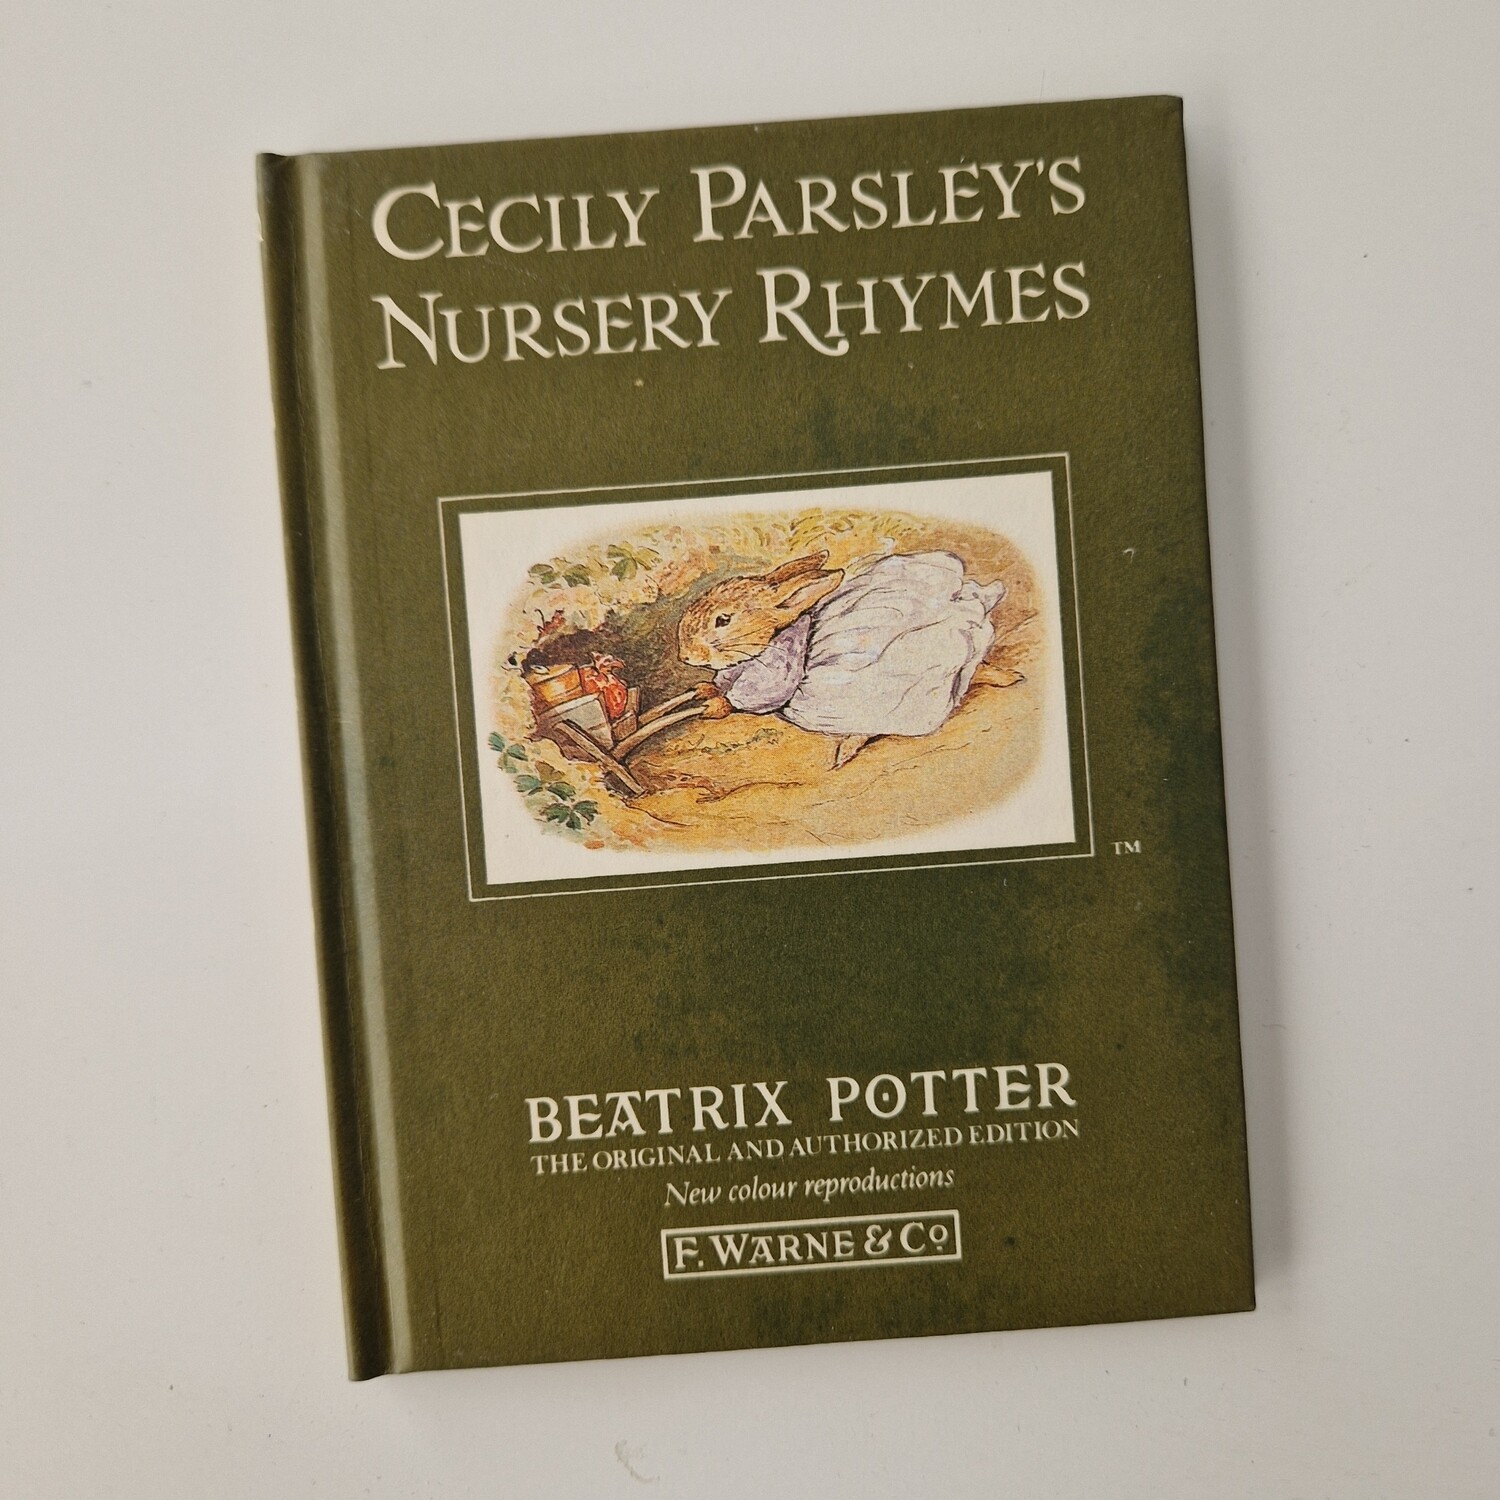 Cecily Parsley's Nursery Rhymes Notebook - Beatrix Potter